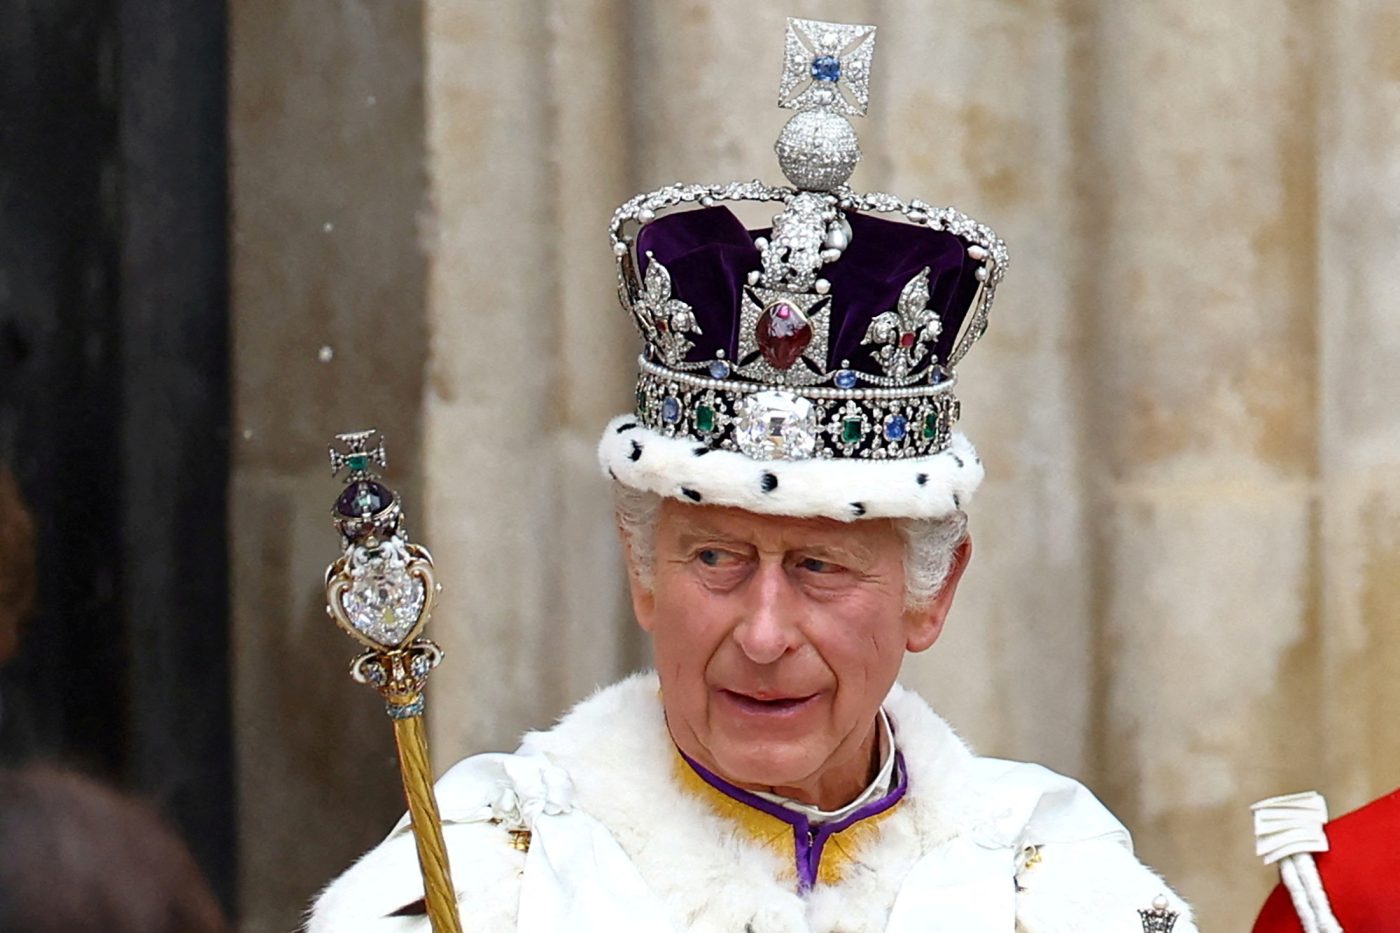 Photo: Britain's King Charles leaves Westminster Abbey following his coronation ceremony in London, Britain May 6, 2023. Credit: REUTERS/Lisi Niesner TPX IMAGES OF THE DAY